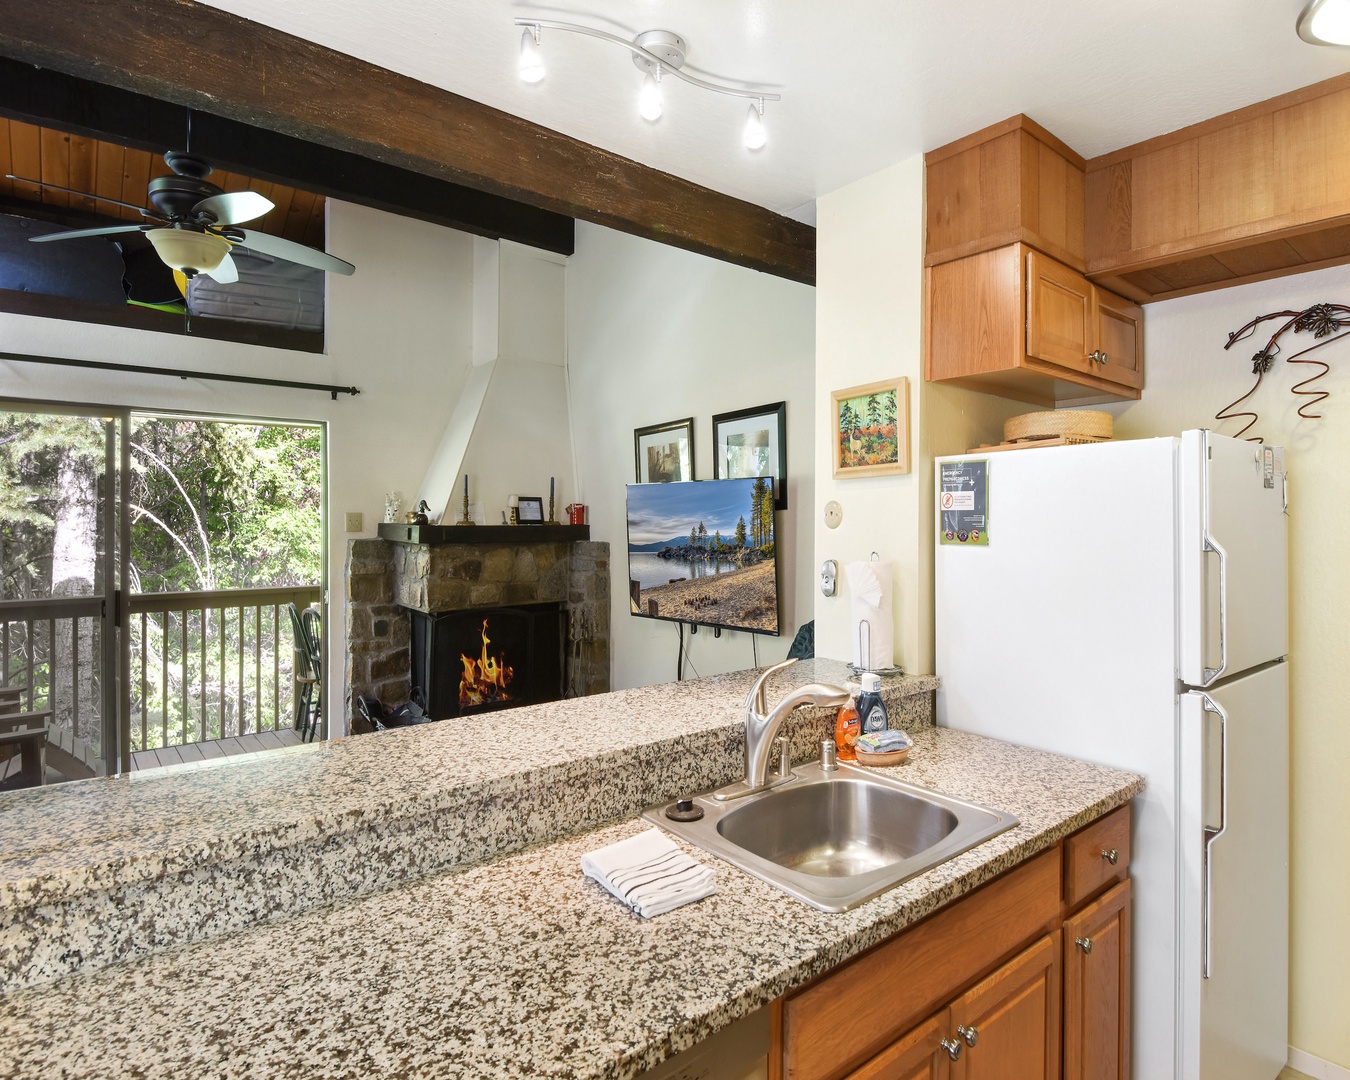 Kitchen with drip coffee pot, toaster, toaster oven, and more